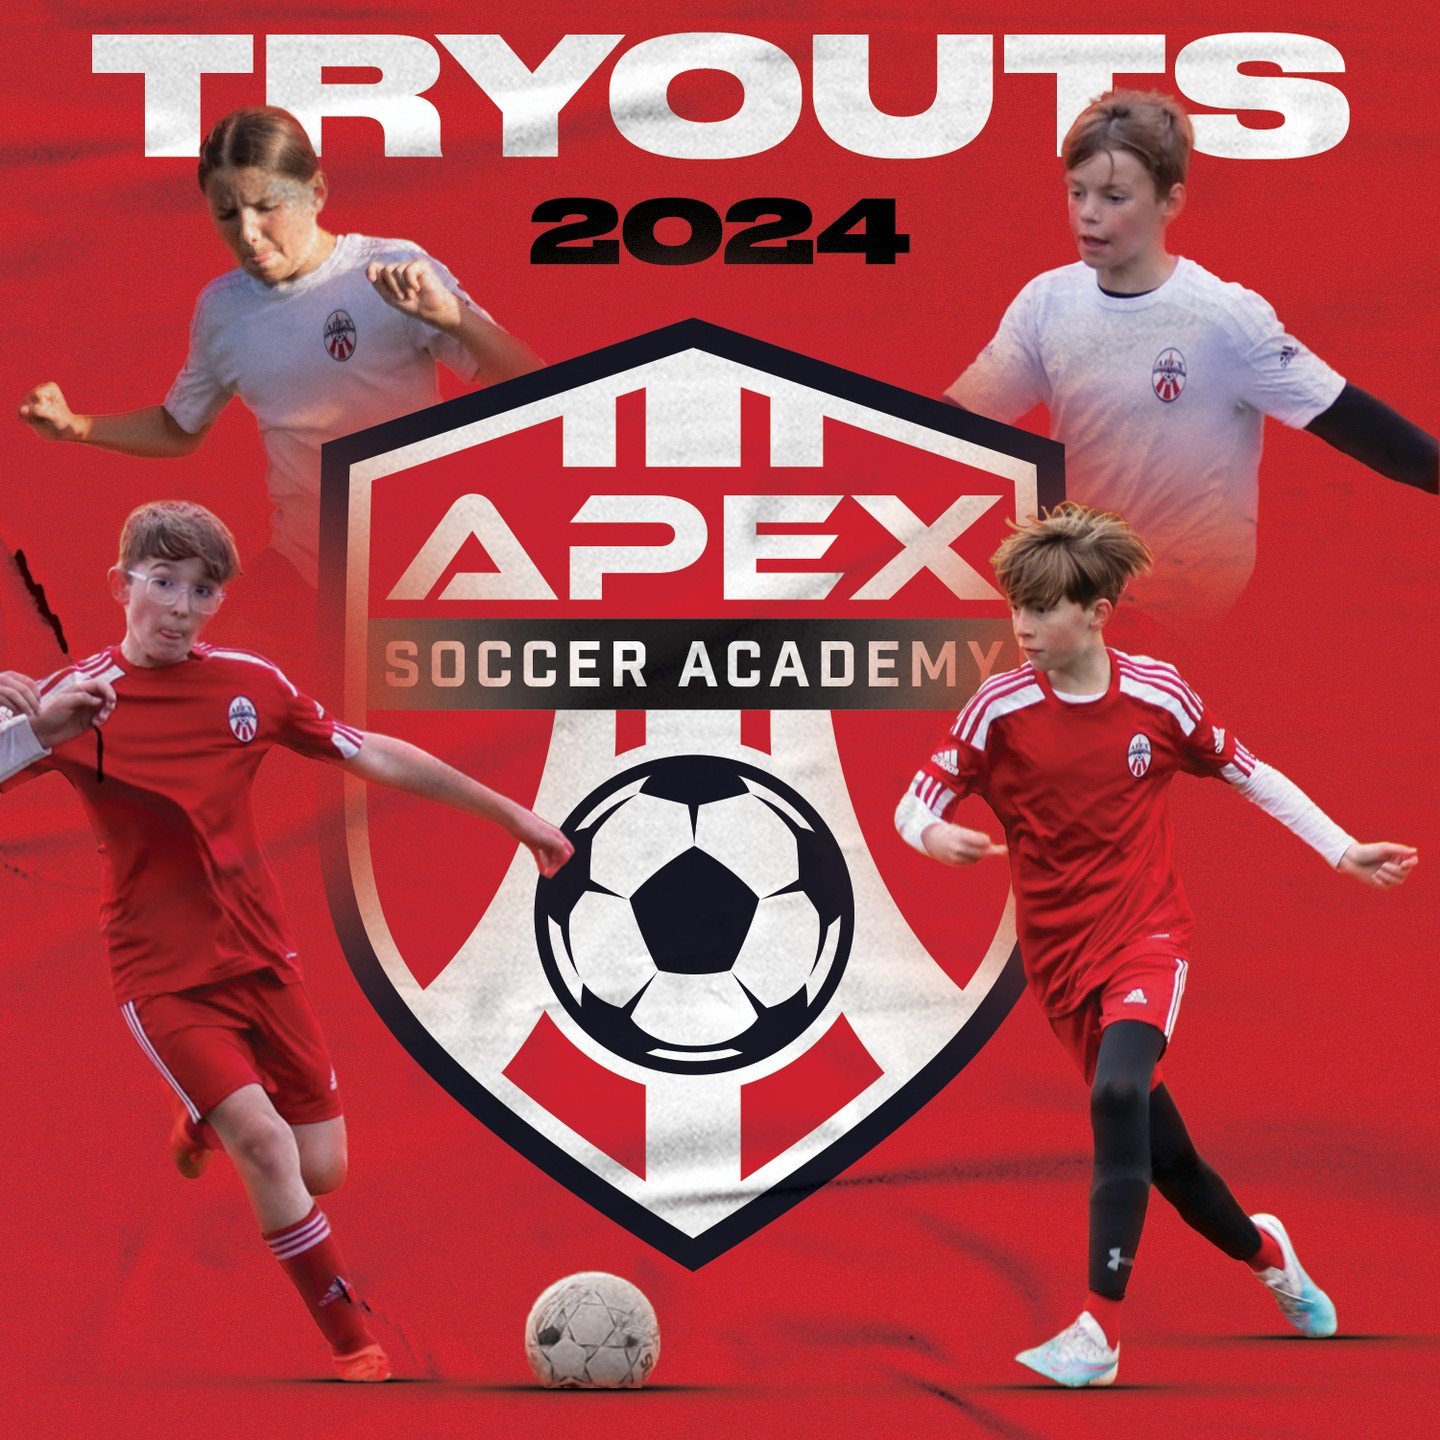 Tryout Registration is open for Apex Select‼️ All Tryouts will be held at the Gregg Young Sports Campus in Norwalk ⚽️

https://www.apexsocceracademy.com/tryouts 

For any questions reach out to info@apexsocceracademy.com

#NorwalkSoccer #CarlisleSocc